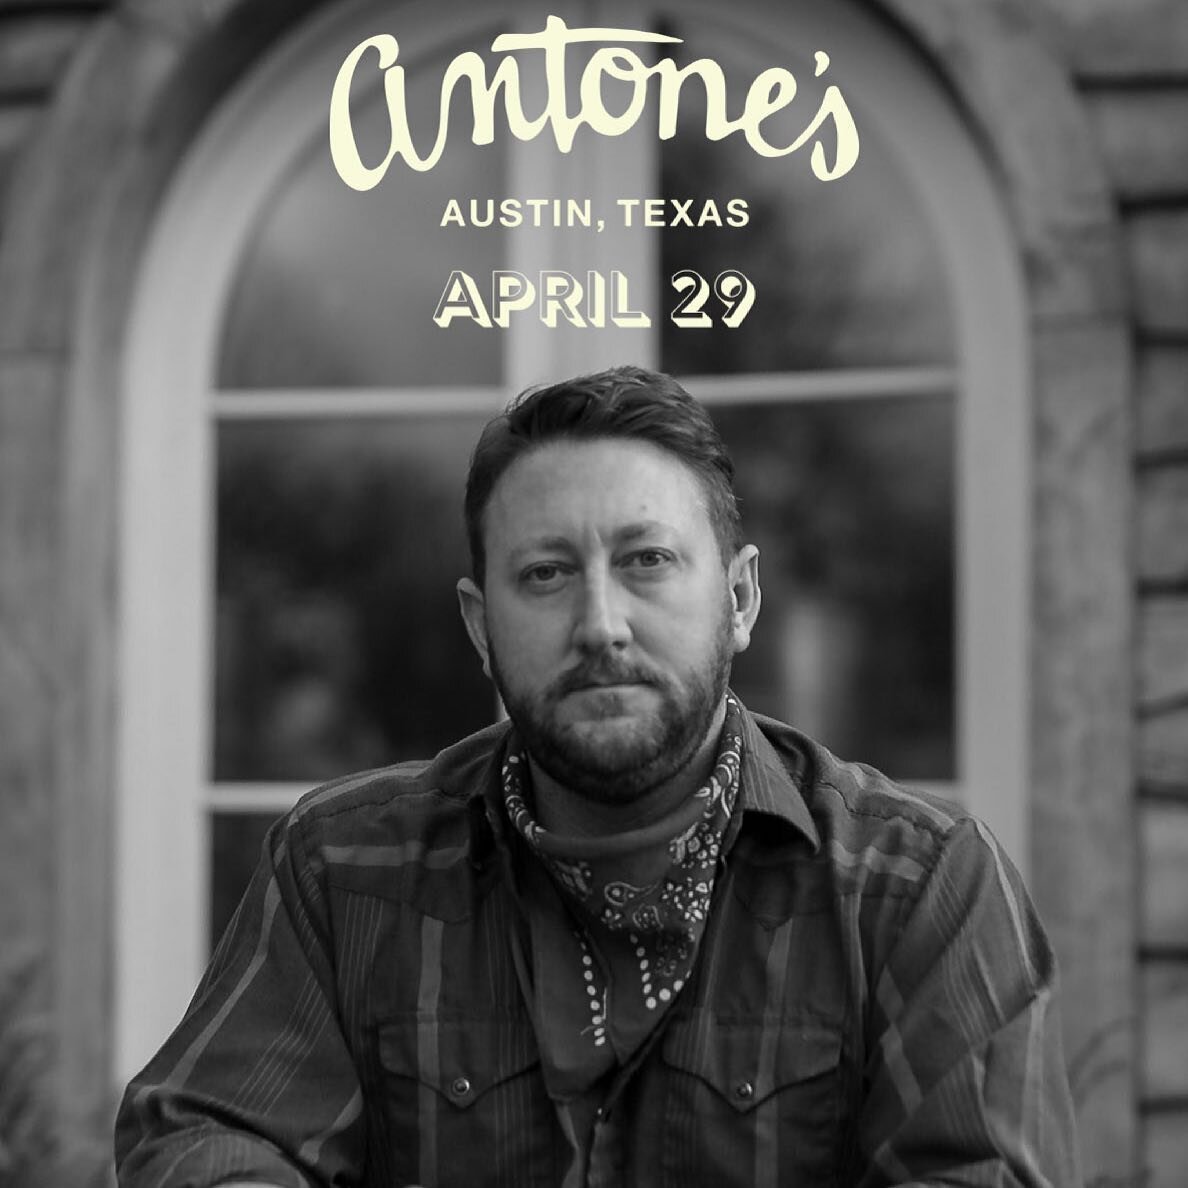 Austin - April 29 I&rsquo;ll be at @antonesnightclub with @juanathantyler - Tickets on sale now https://www.eventbrite.com/e/jonathan-tyler-final-antones-residency-show-w-clint-bracher-tickets-149557786365

Don&rsquo;t miss out as this will be Jonath